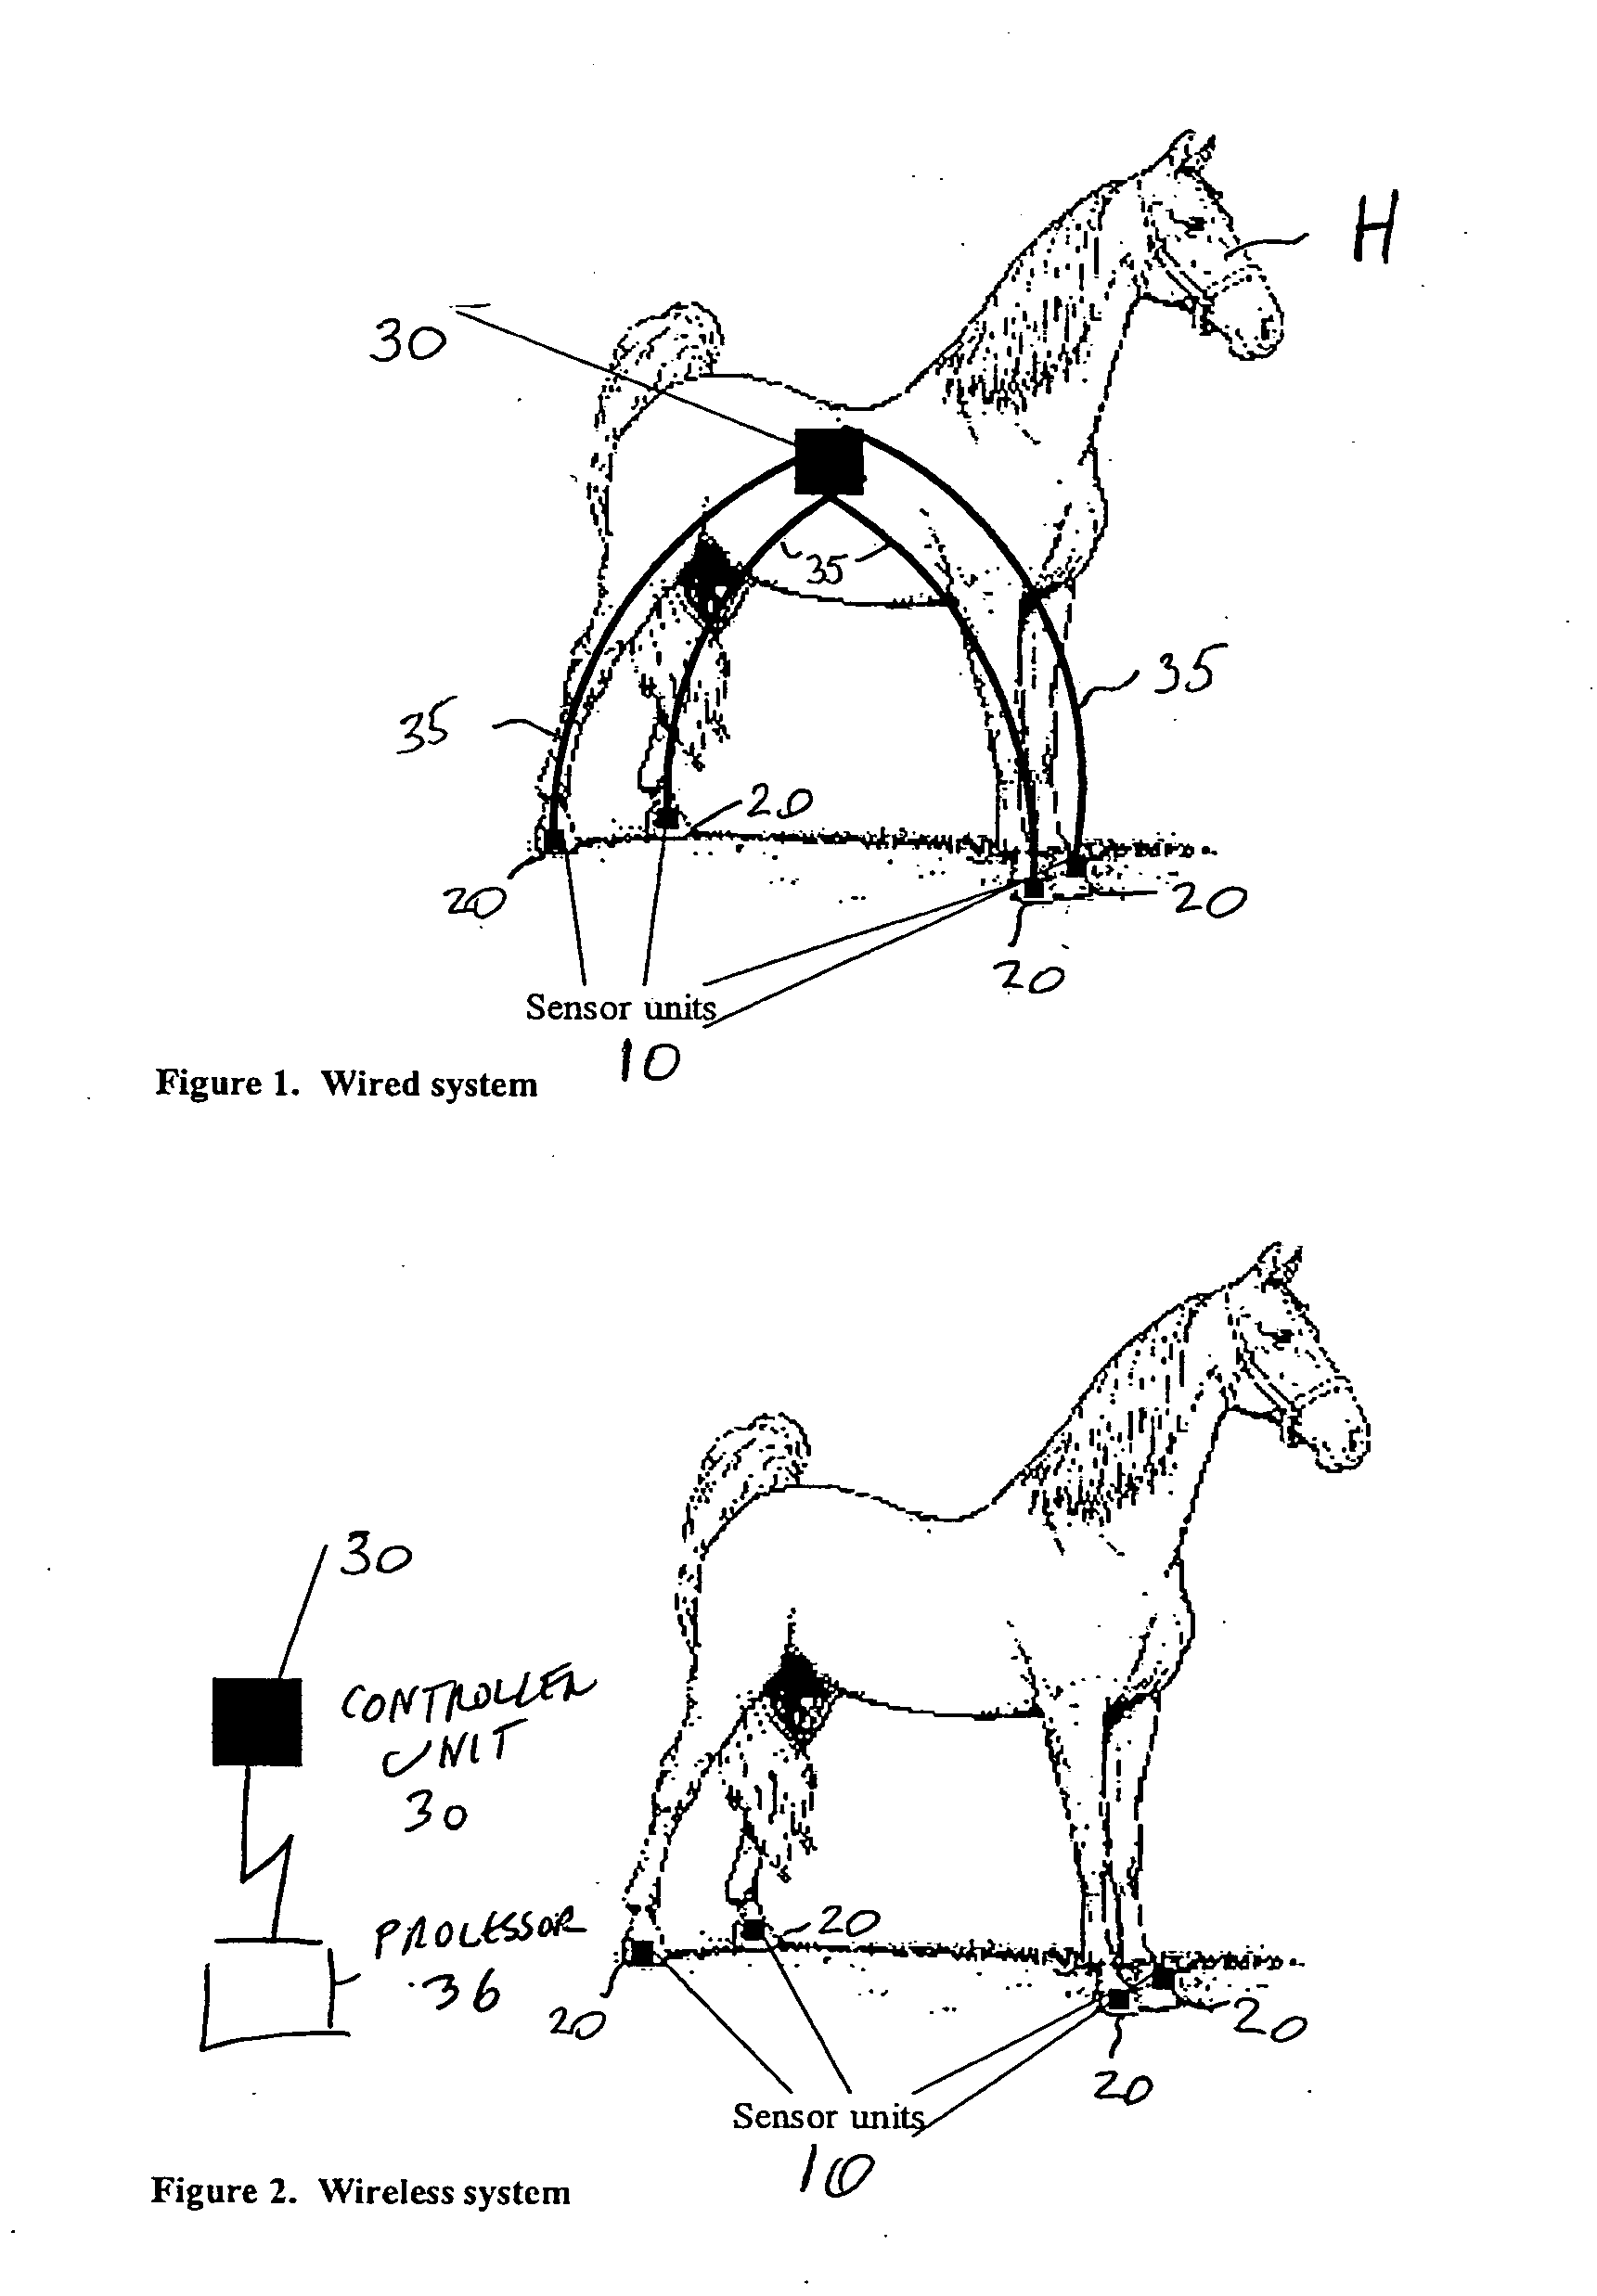 Method and apparatus for evaluating animals' health and performance